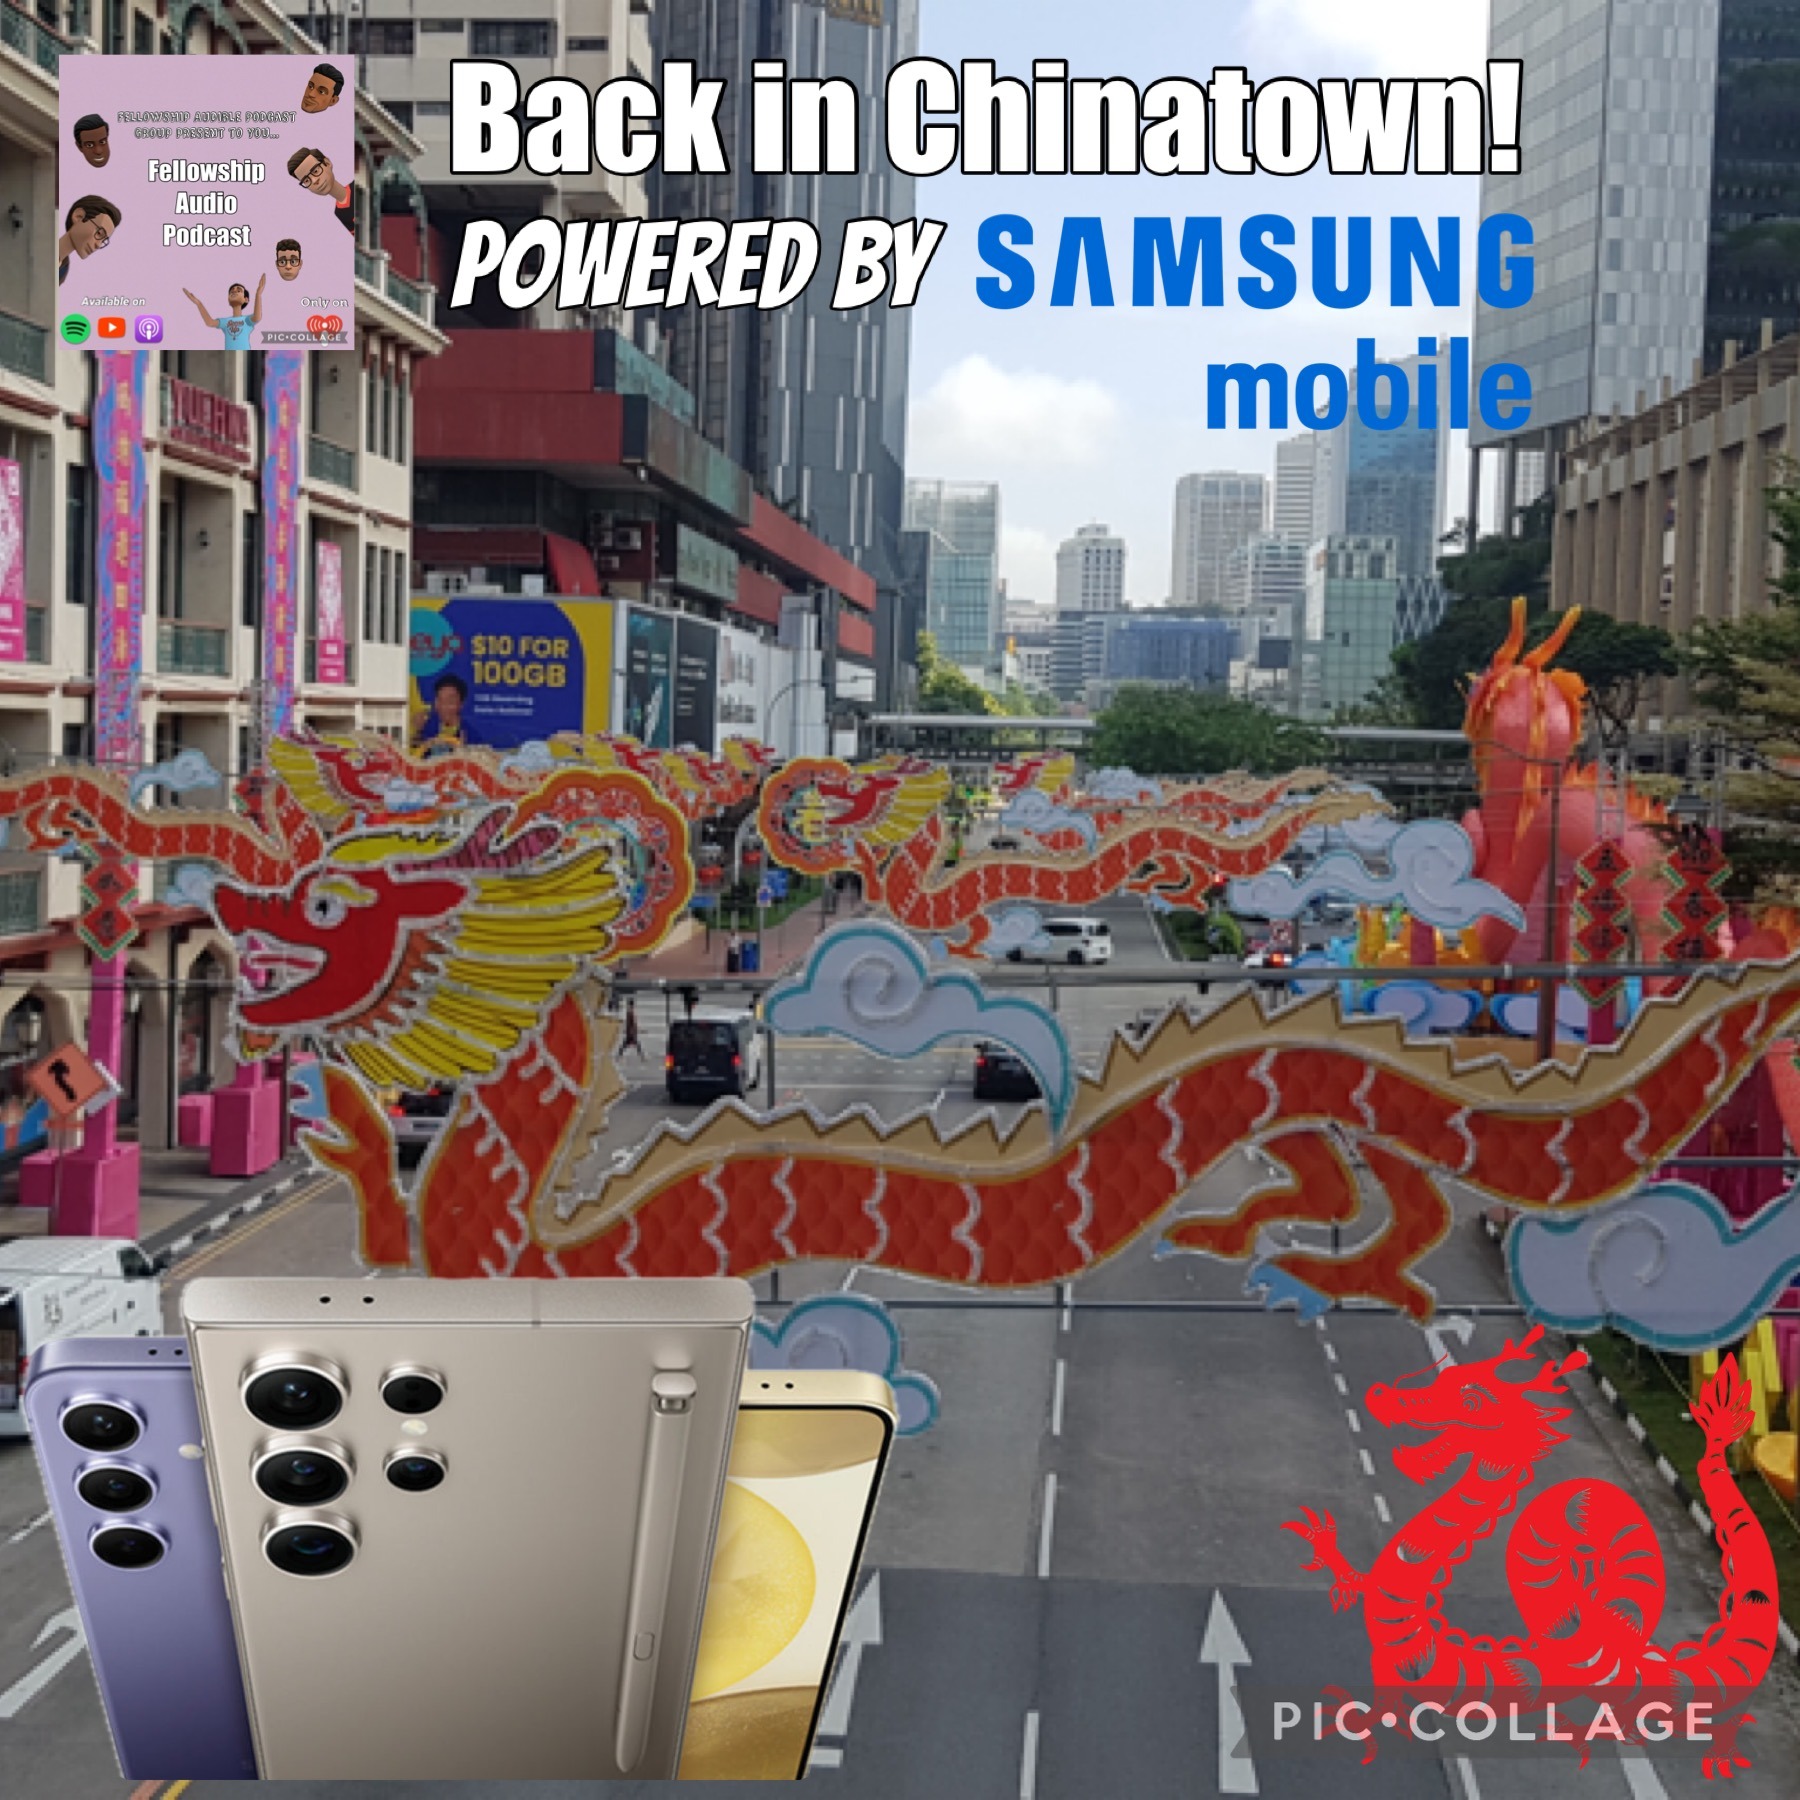 To Chinatown and Back | Fellowship Audio Podcast